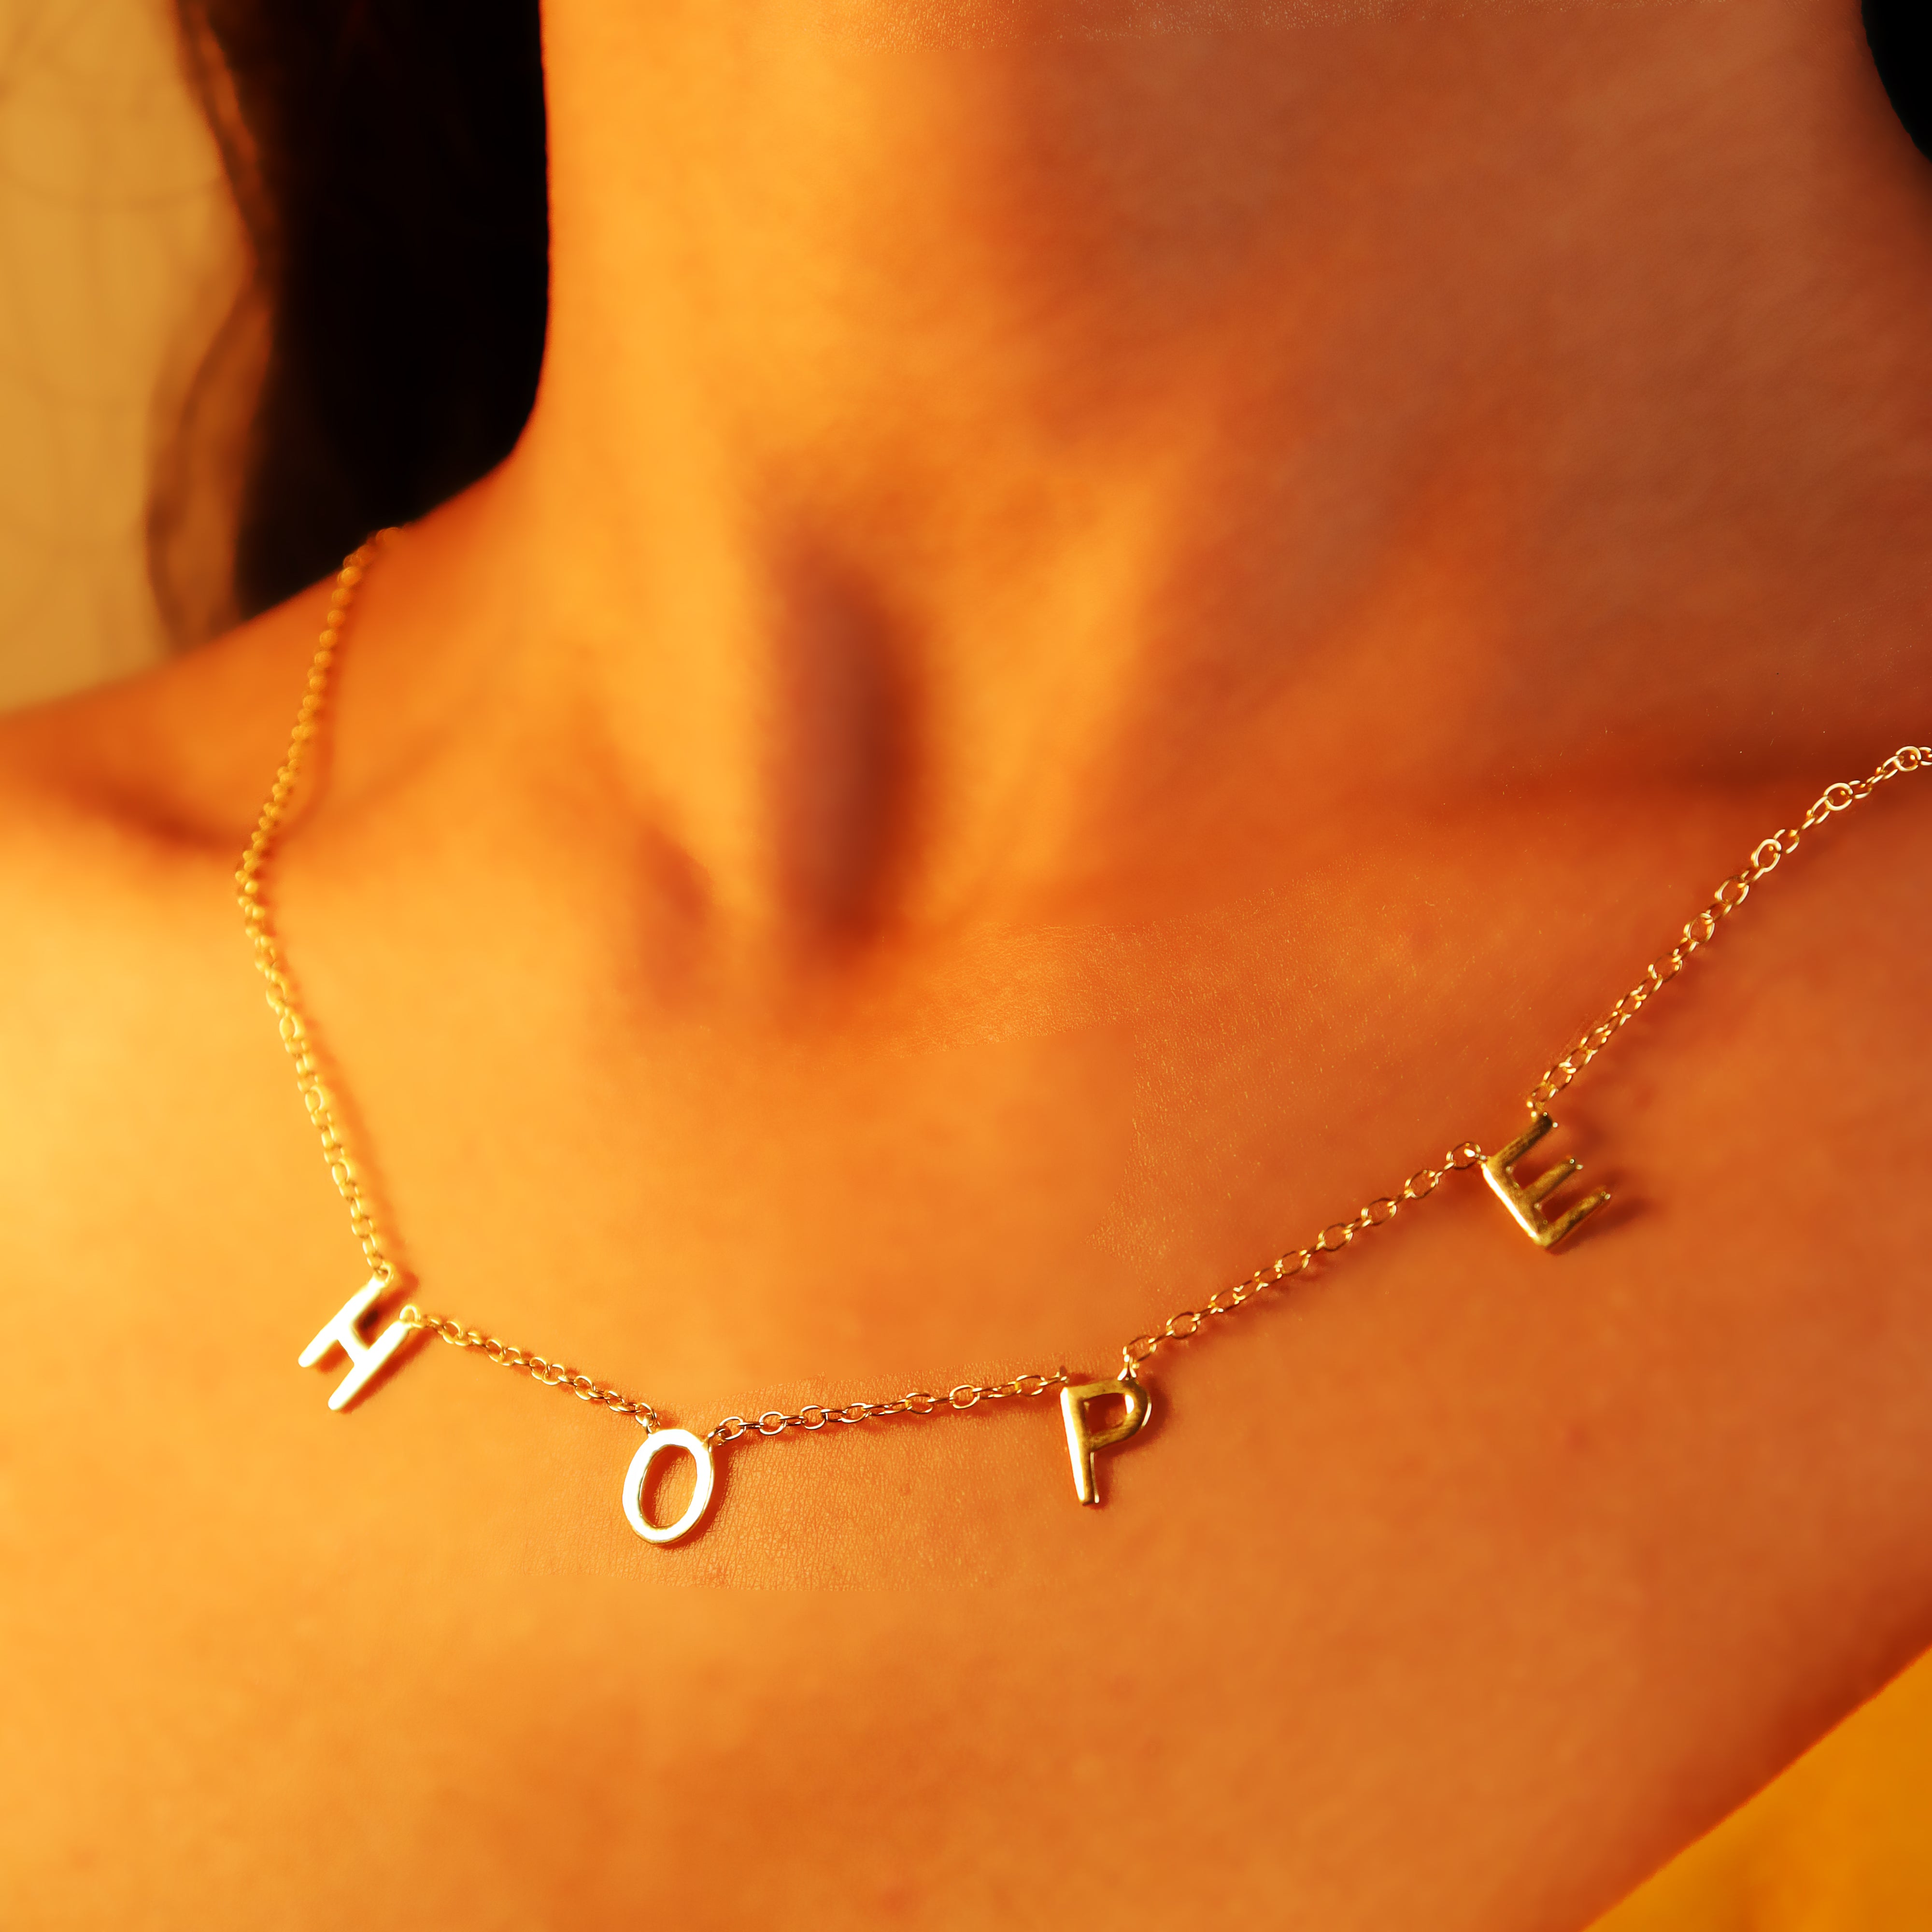 Silver Necklace with Hope Pendant